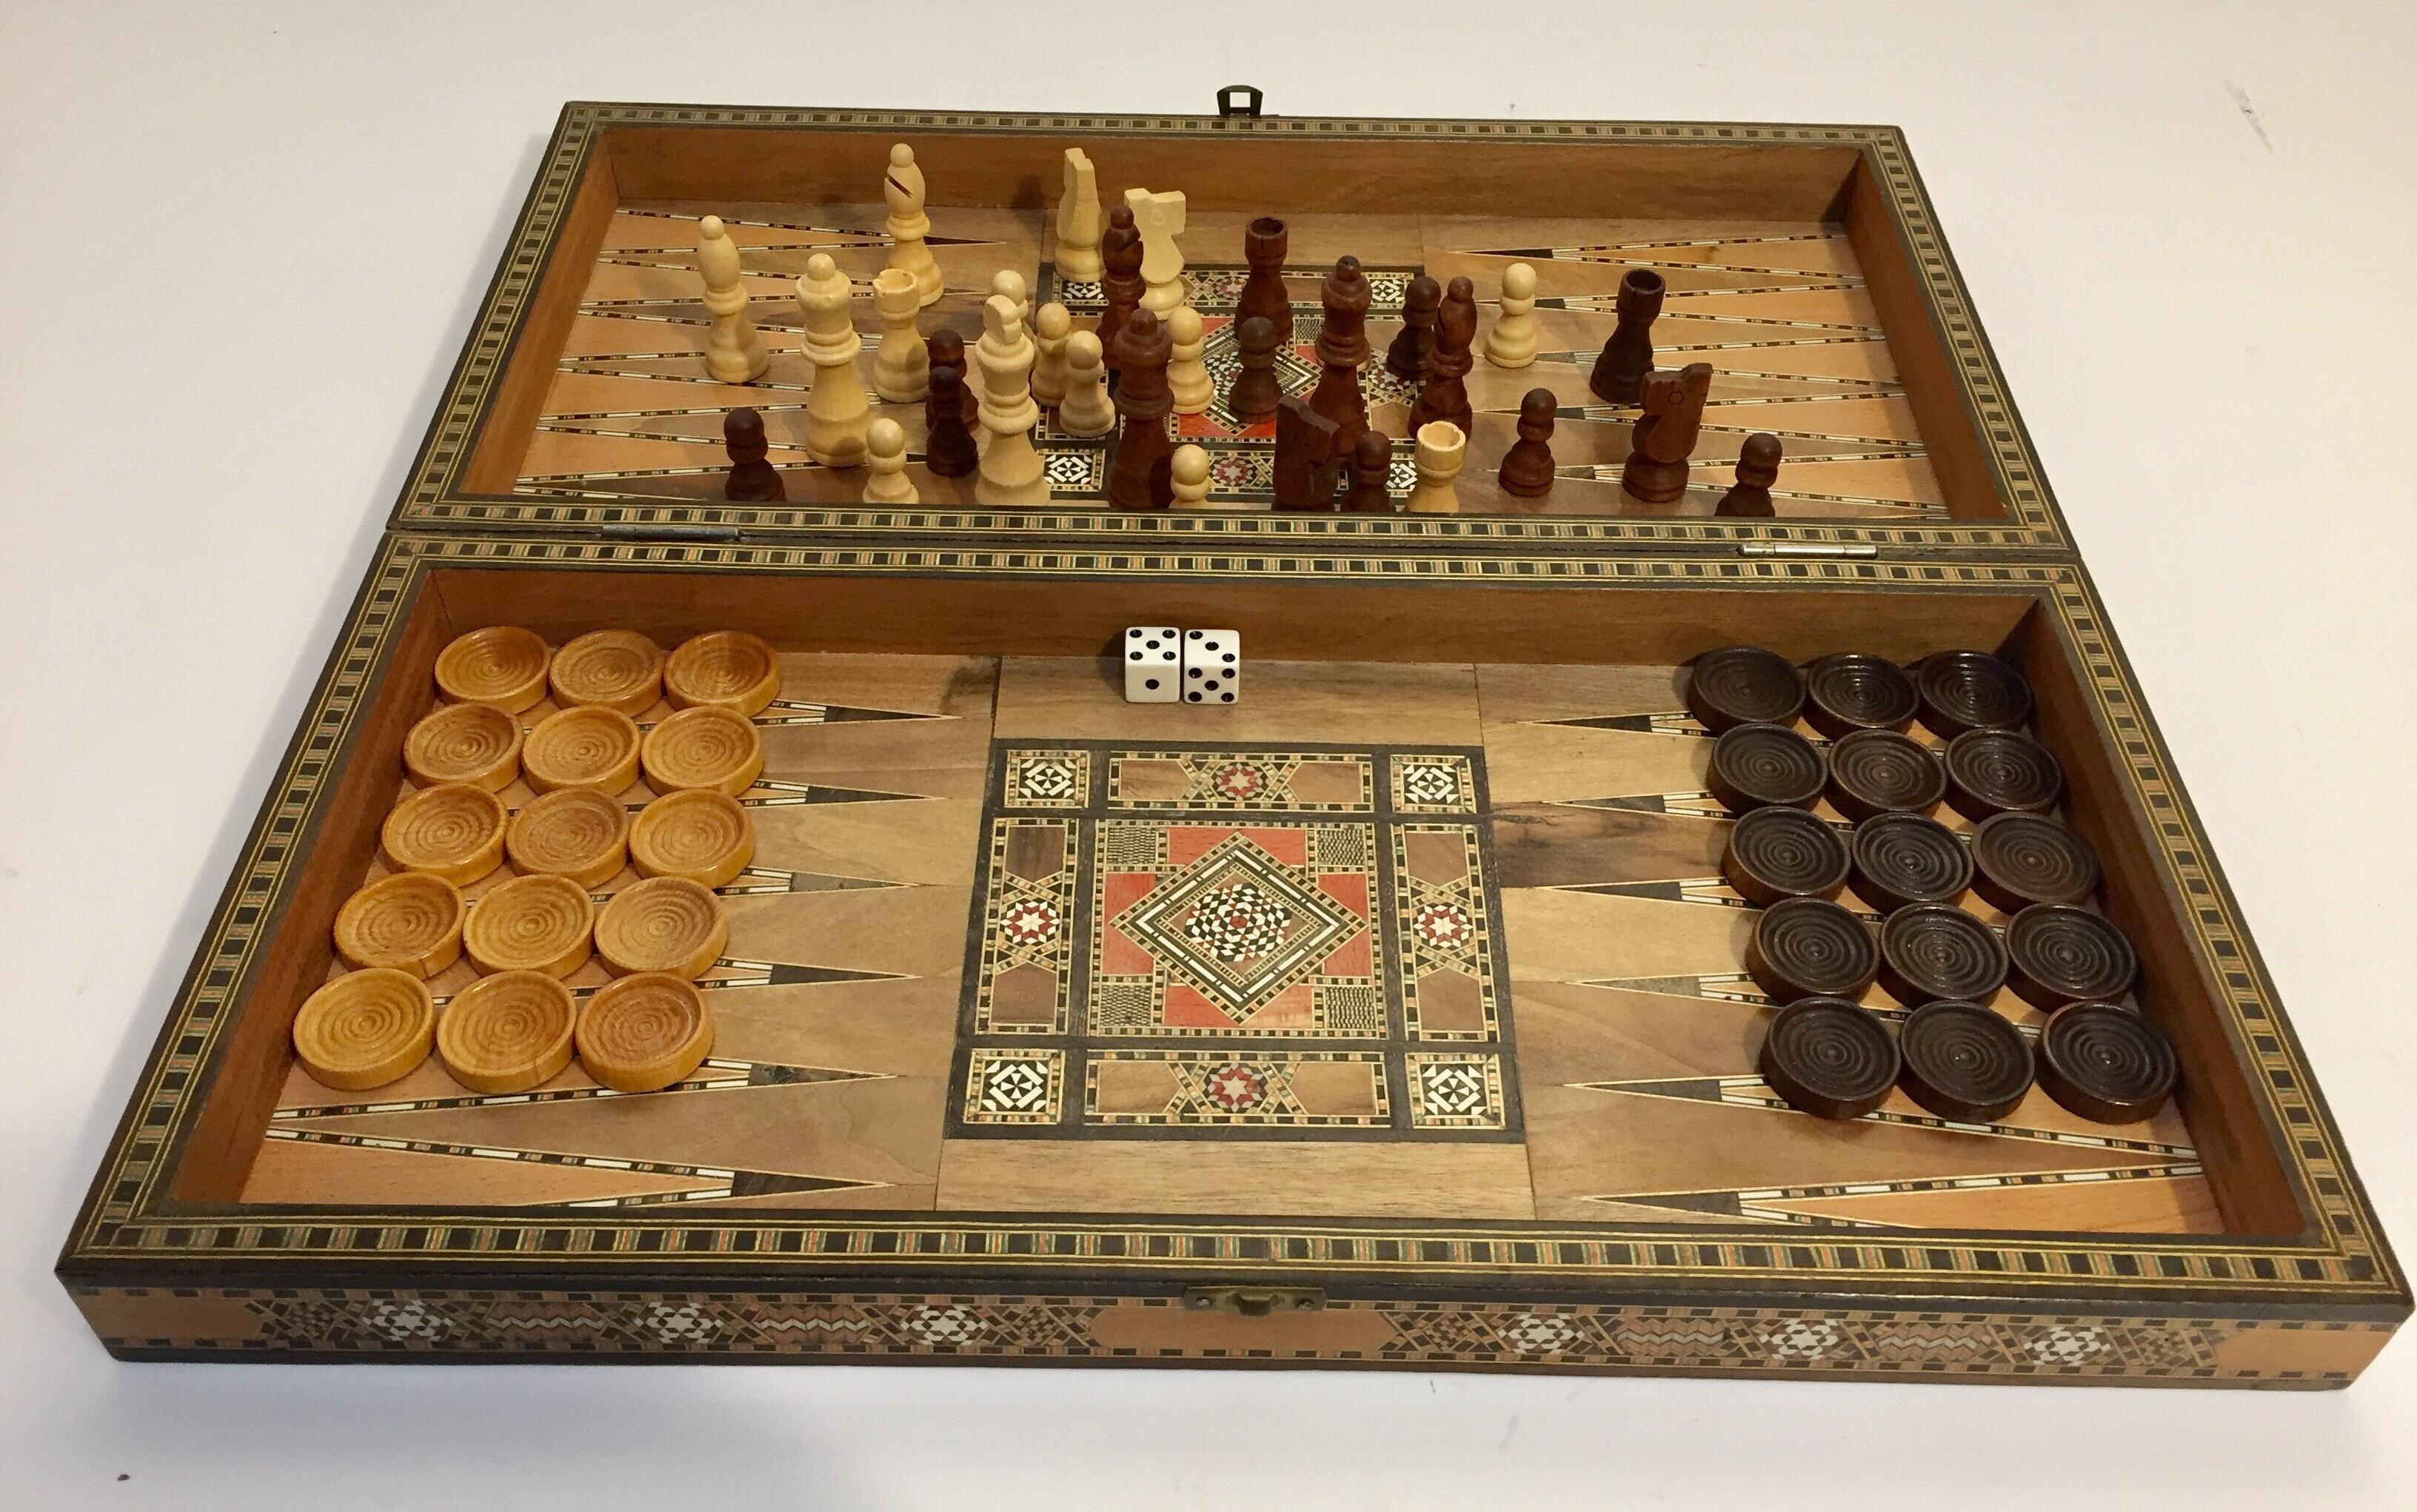 Vintage large Mid Century Syrian inlaid mosaic backgammon and chess game.
Great inlaid micro mosaic hinged marquetry game box features a chess and checker board on the exterior and backgammon board on the interior with all the wooden dice and